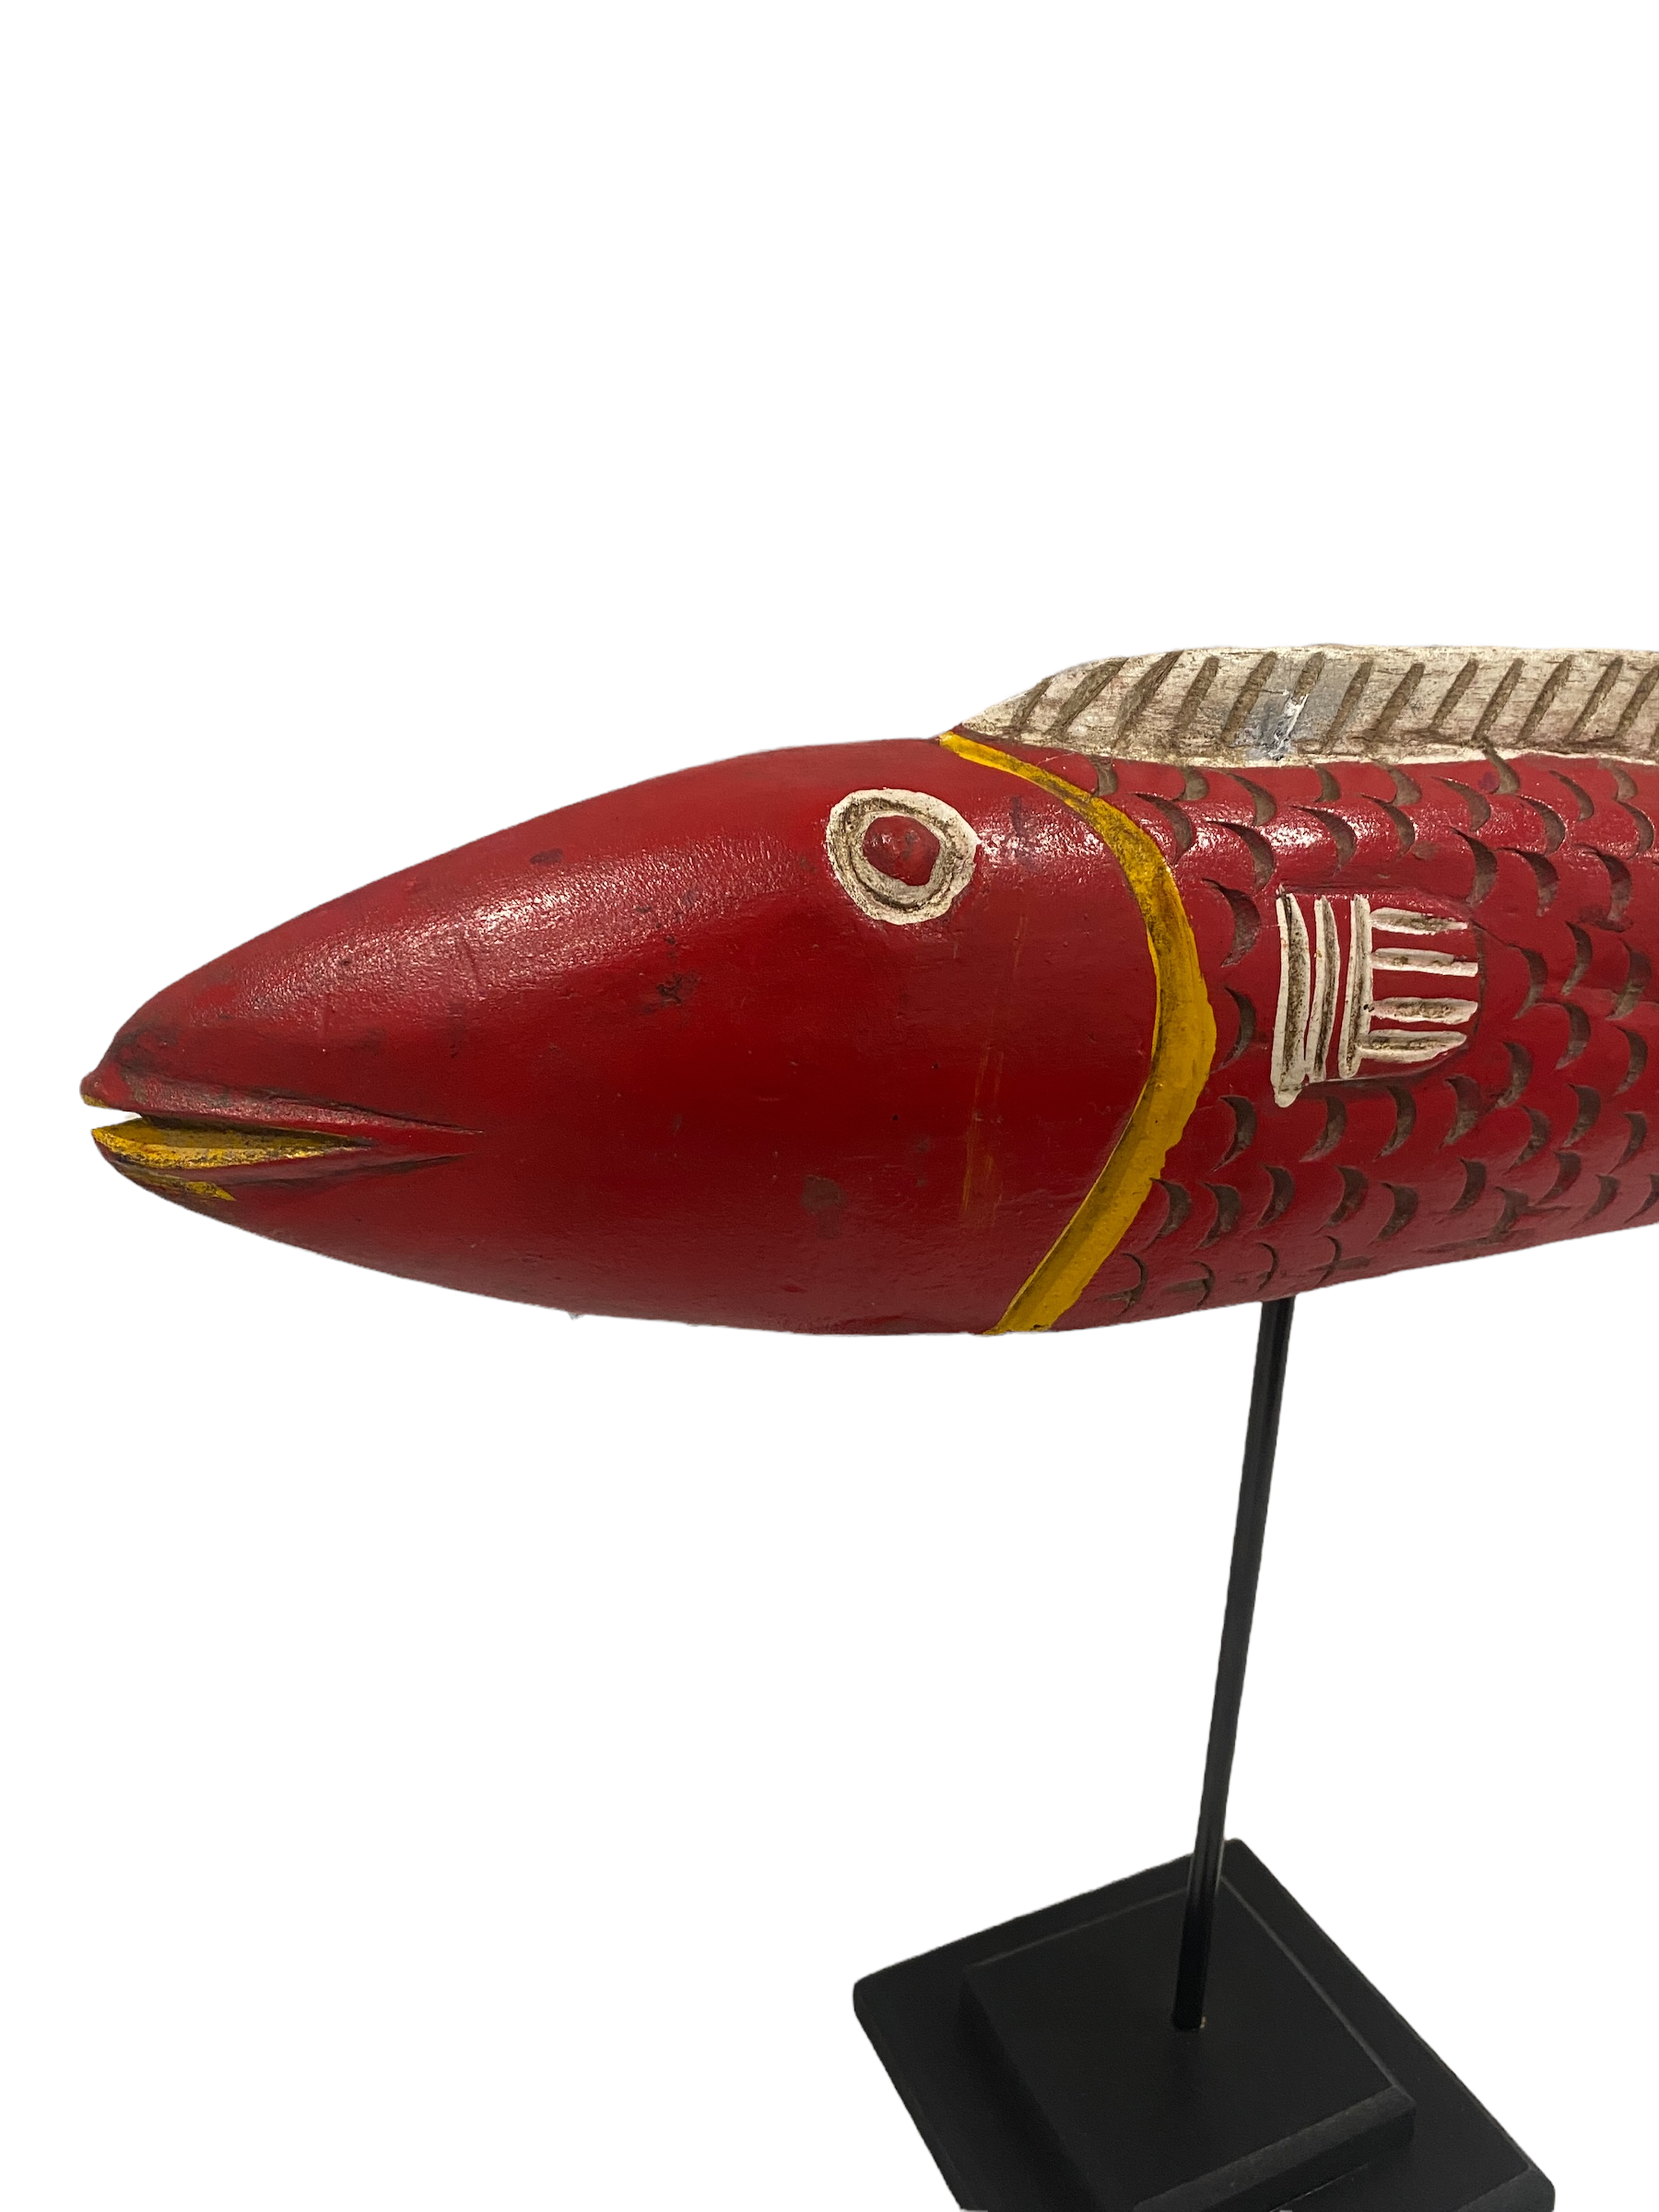 Mail Puppet Fish Red -  (42.2)